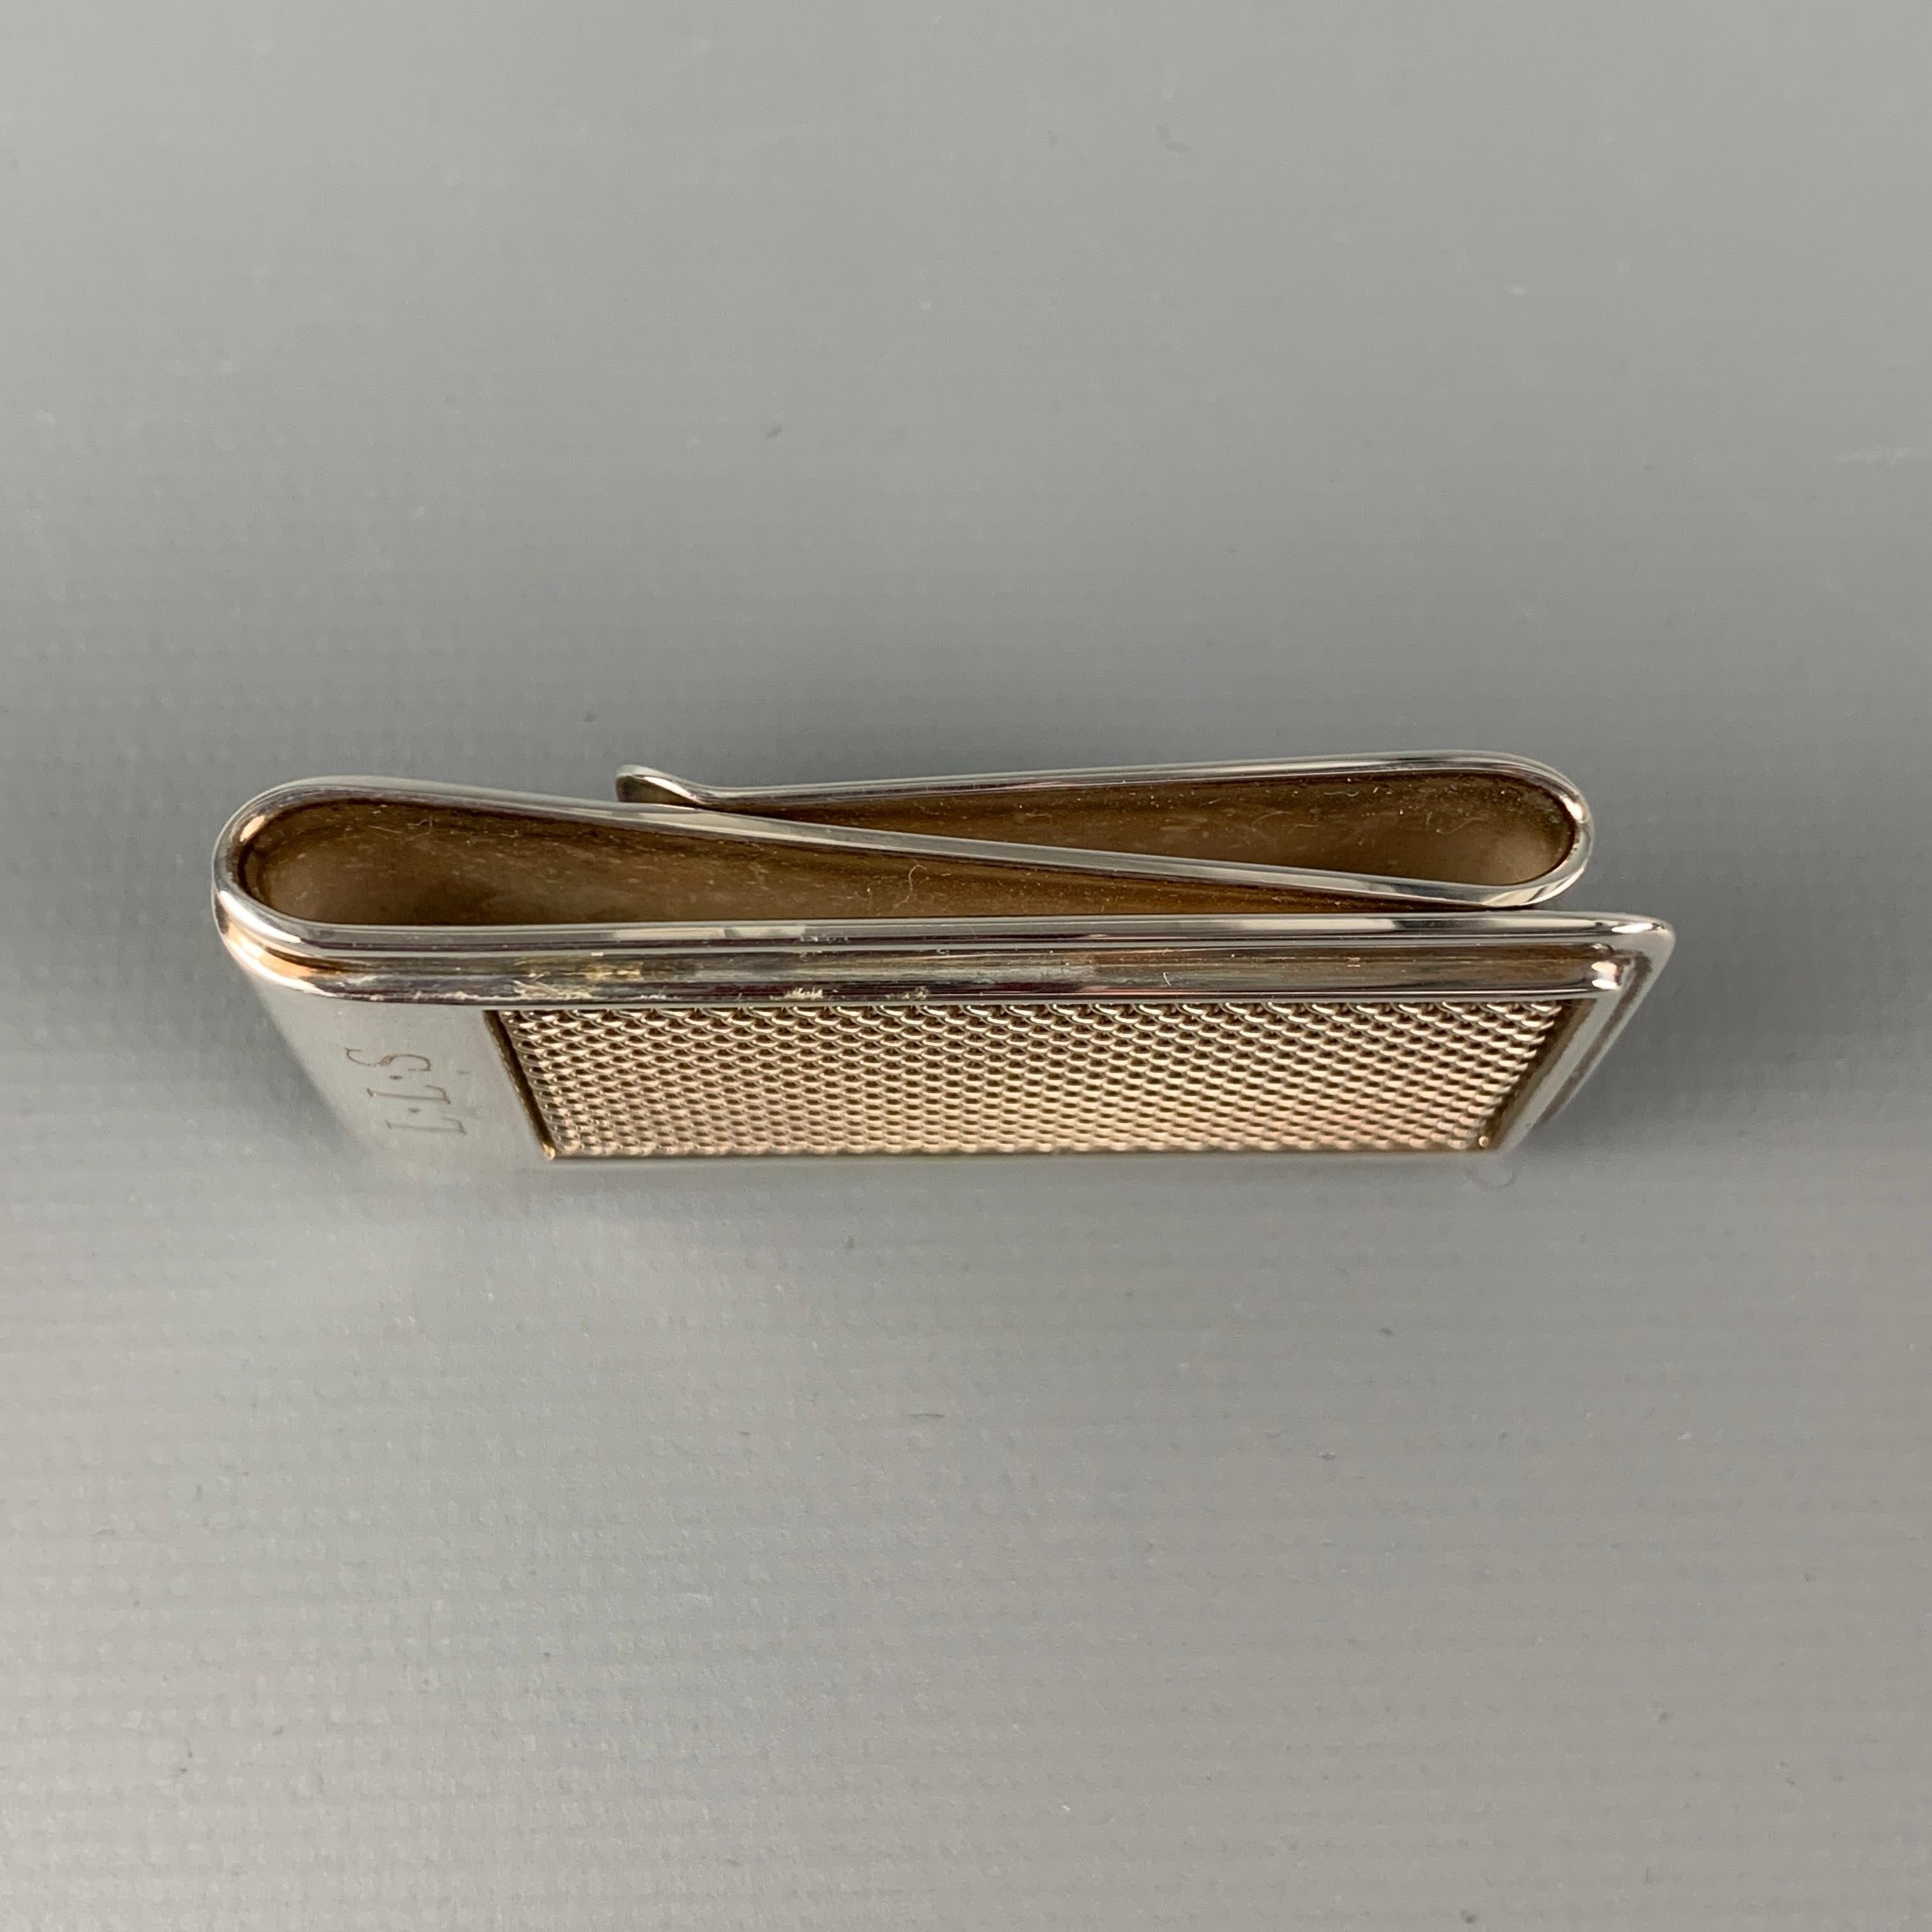 Vintage TIFFANY & CO. money clip comes in a diamond point sterling silver. Includes pouch. 

Very Good Pre-Owned Condition.

Measurements:

Length: 2 in.
Height: 1 in. 